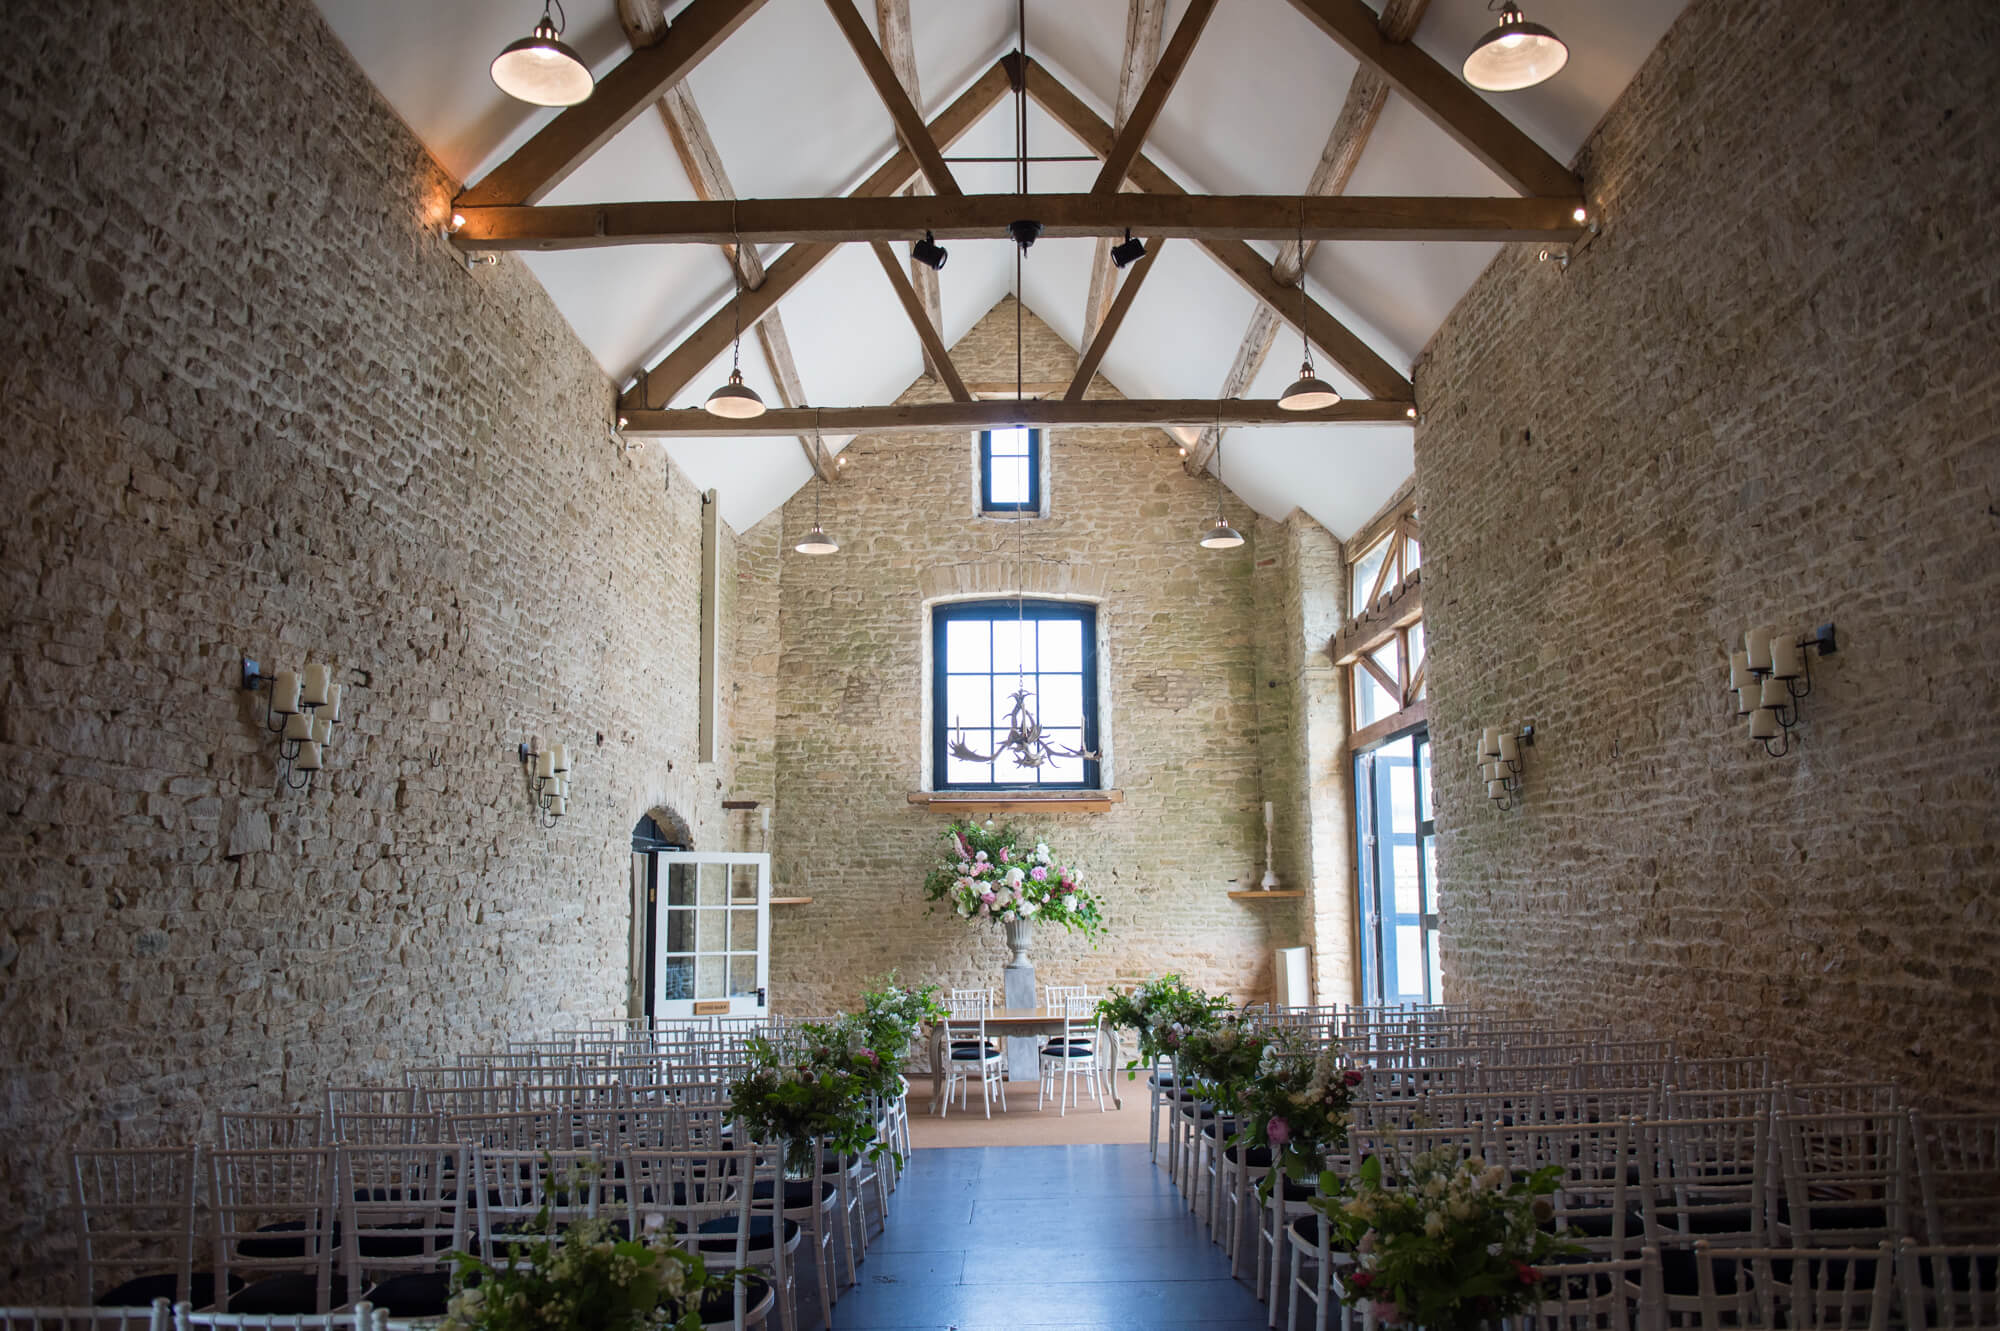 The barn at Merriscourt ready for a wedding 